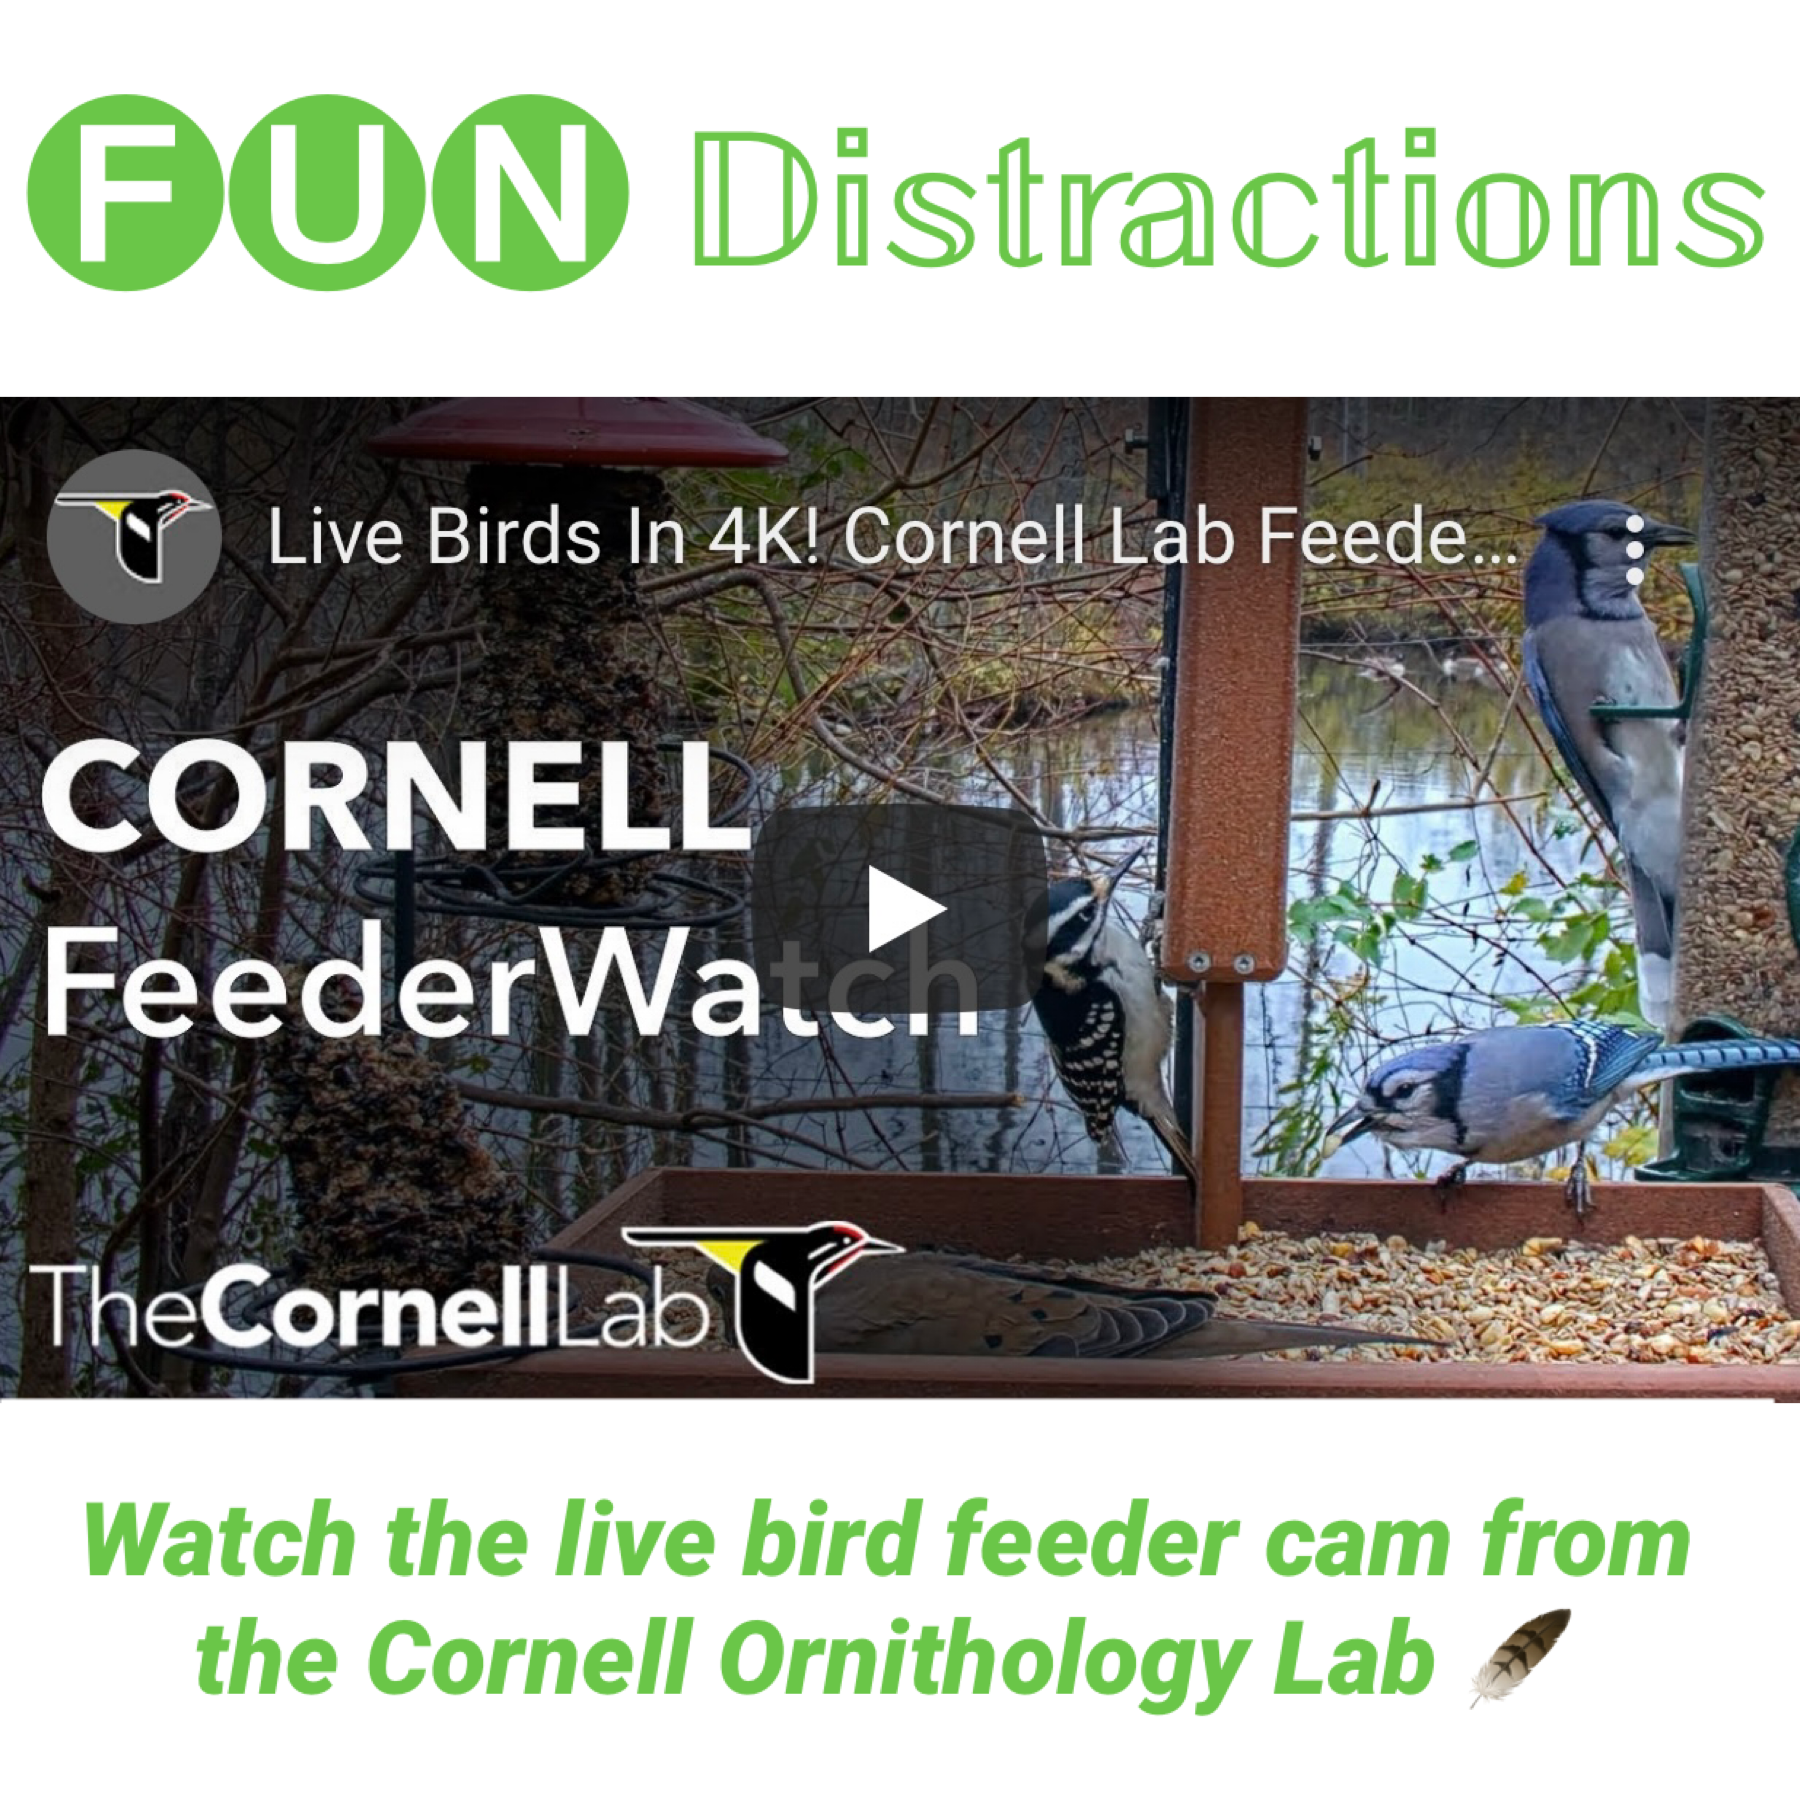 Image from the video feed for Cornell's Bird Feeder camera of four birds at the feeder